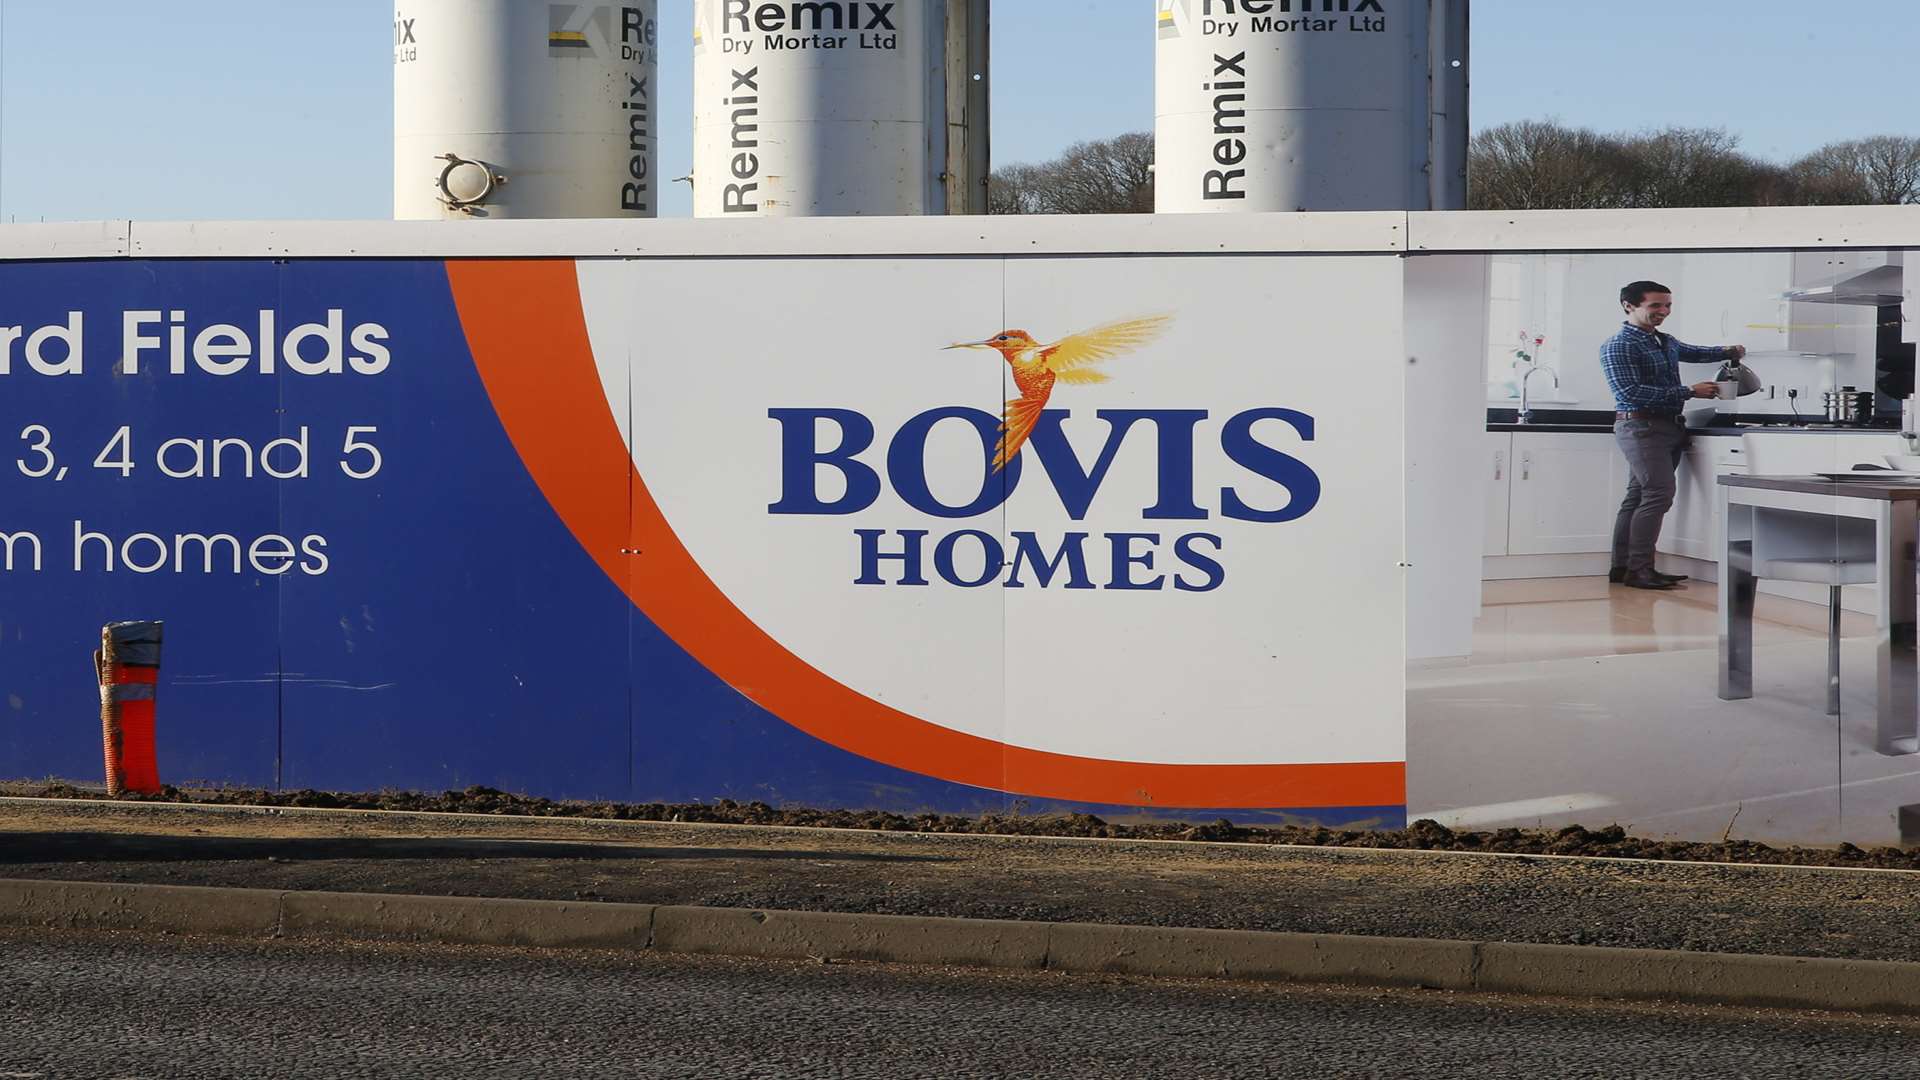 Bovis Homes development at Orchard Fields off Hermitage Lane in Maidstone